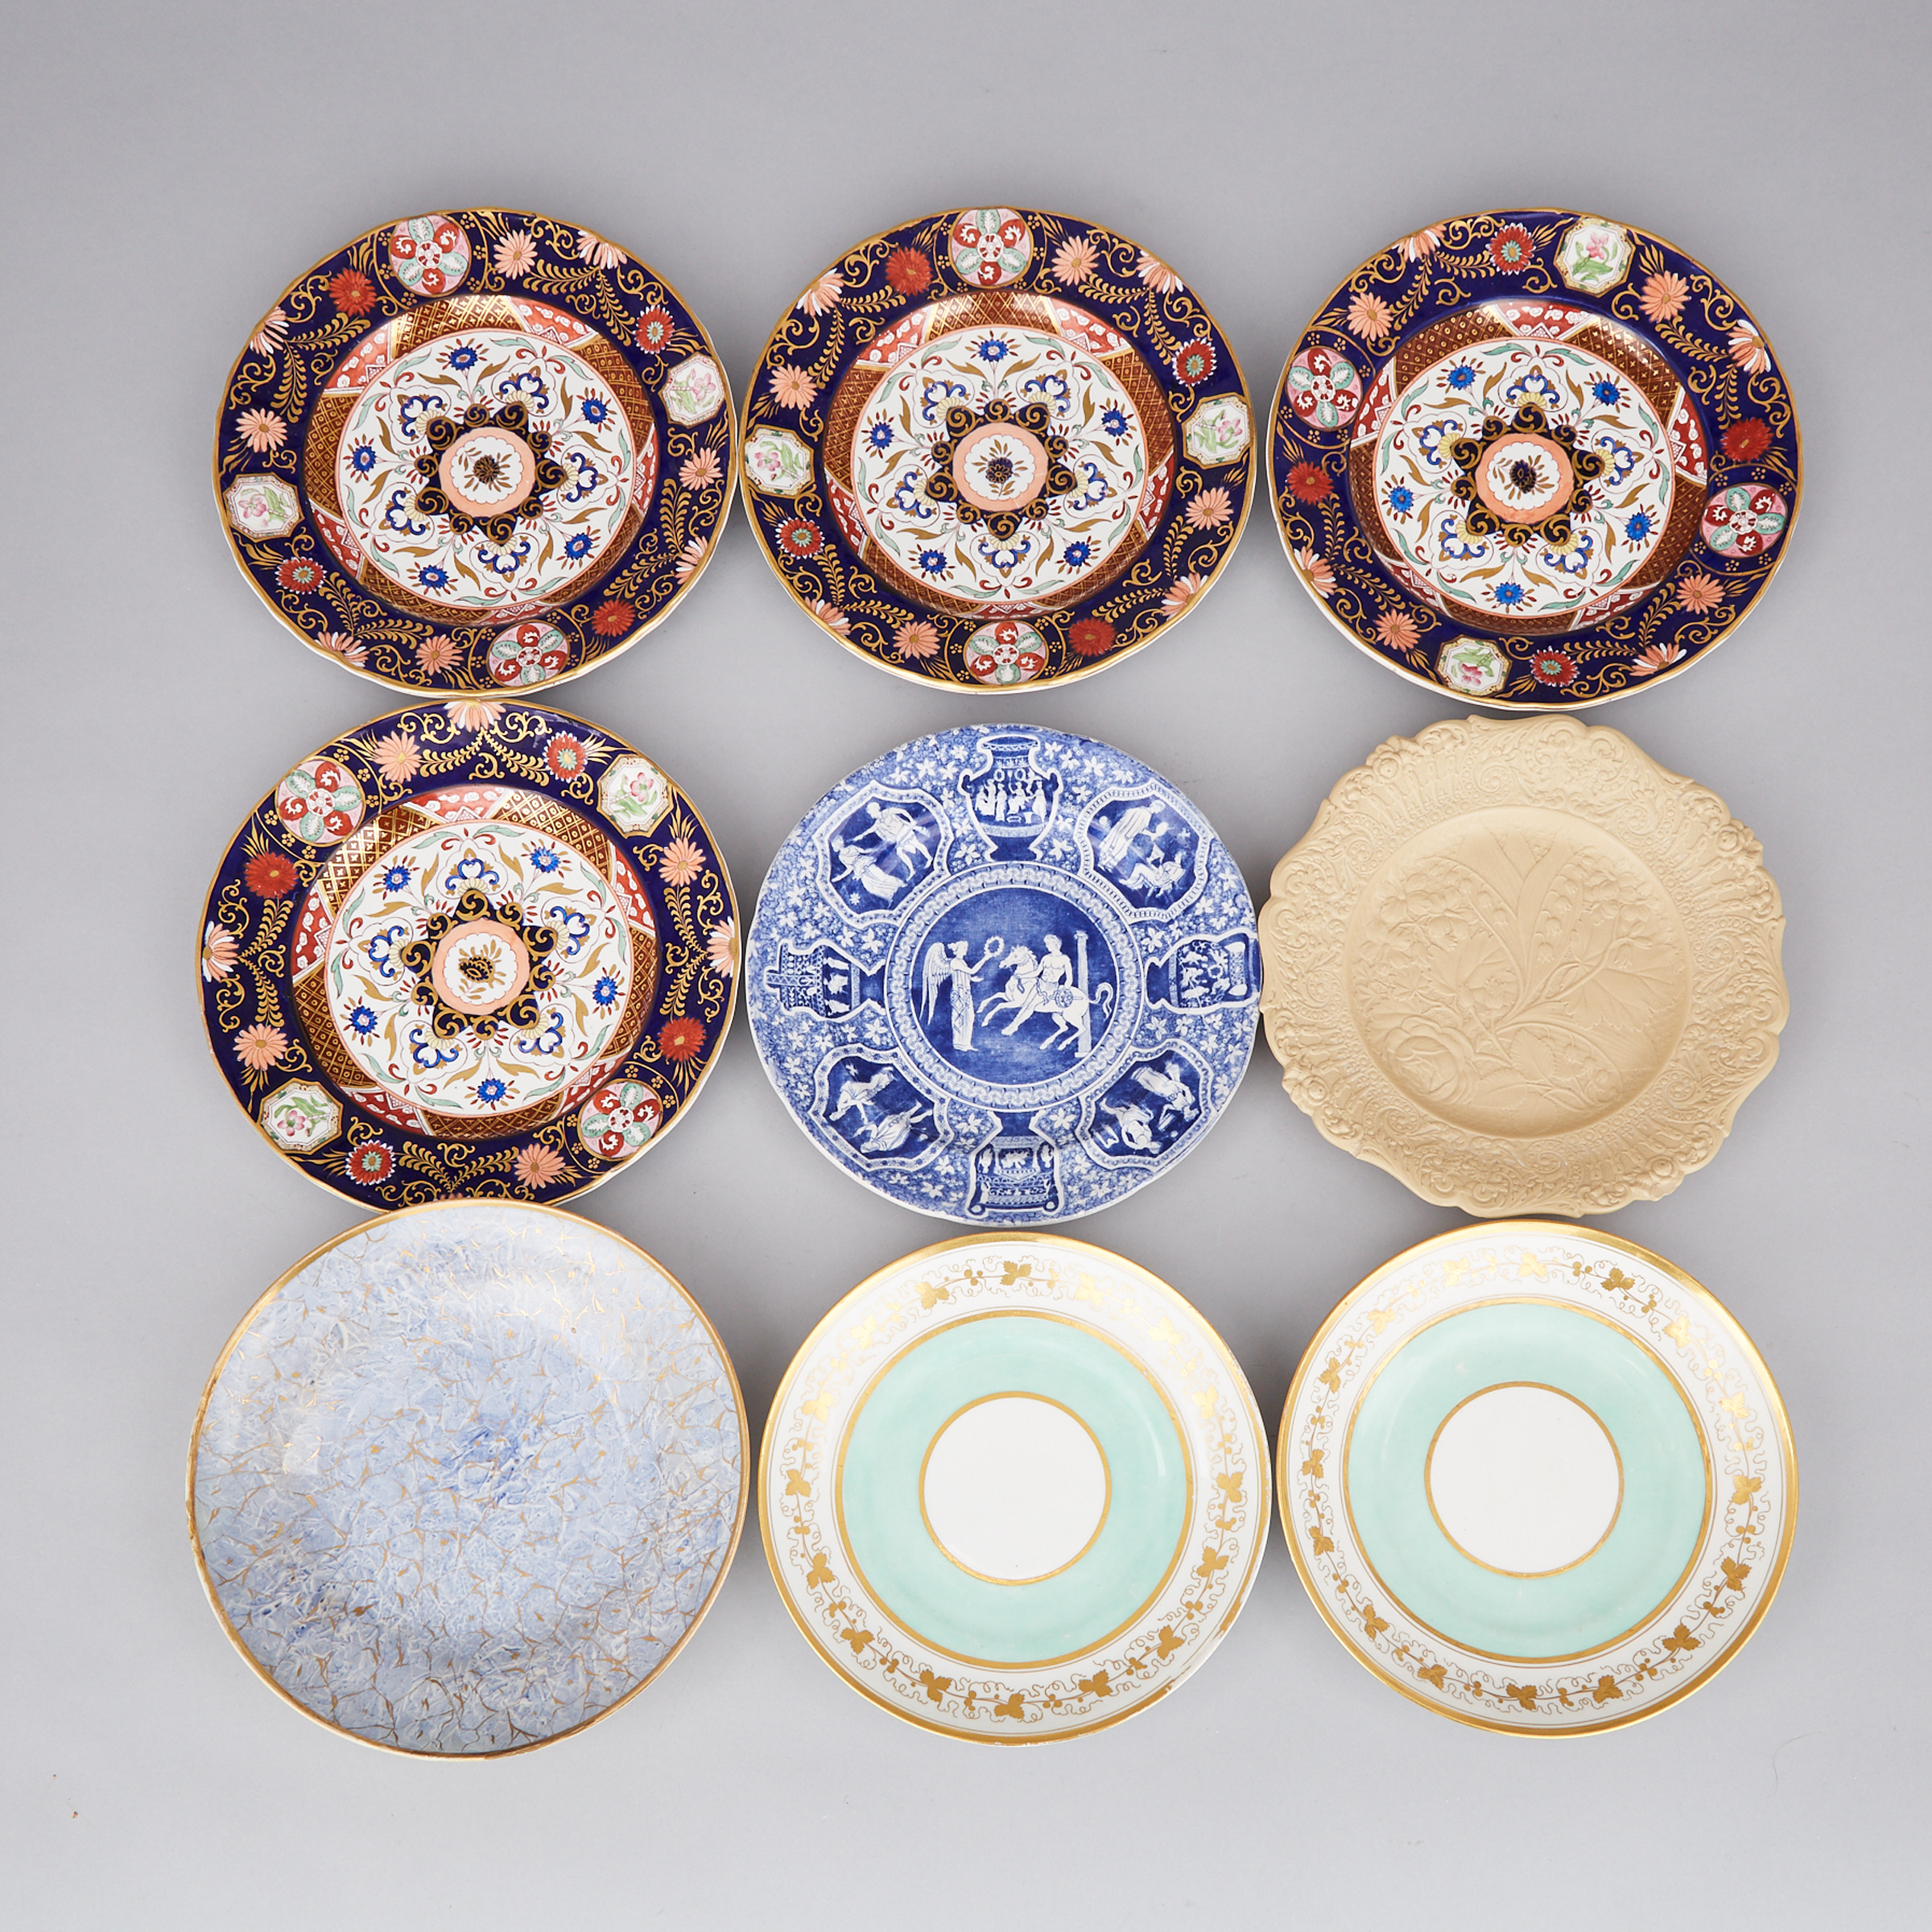 Group of Nine English Pottery and Porcelain Plates, 19th century